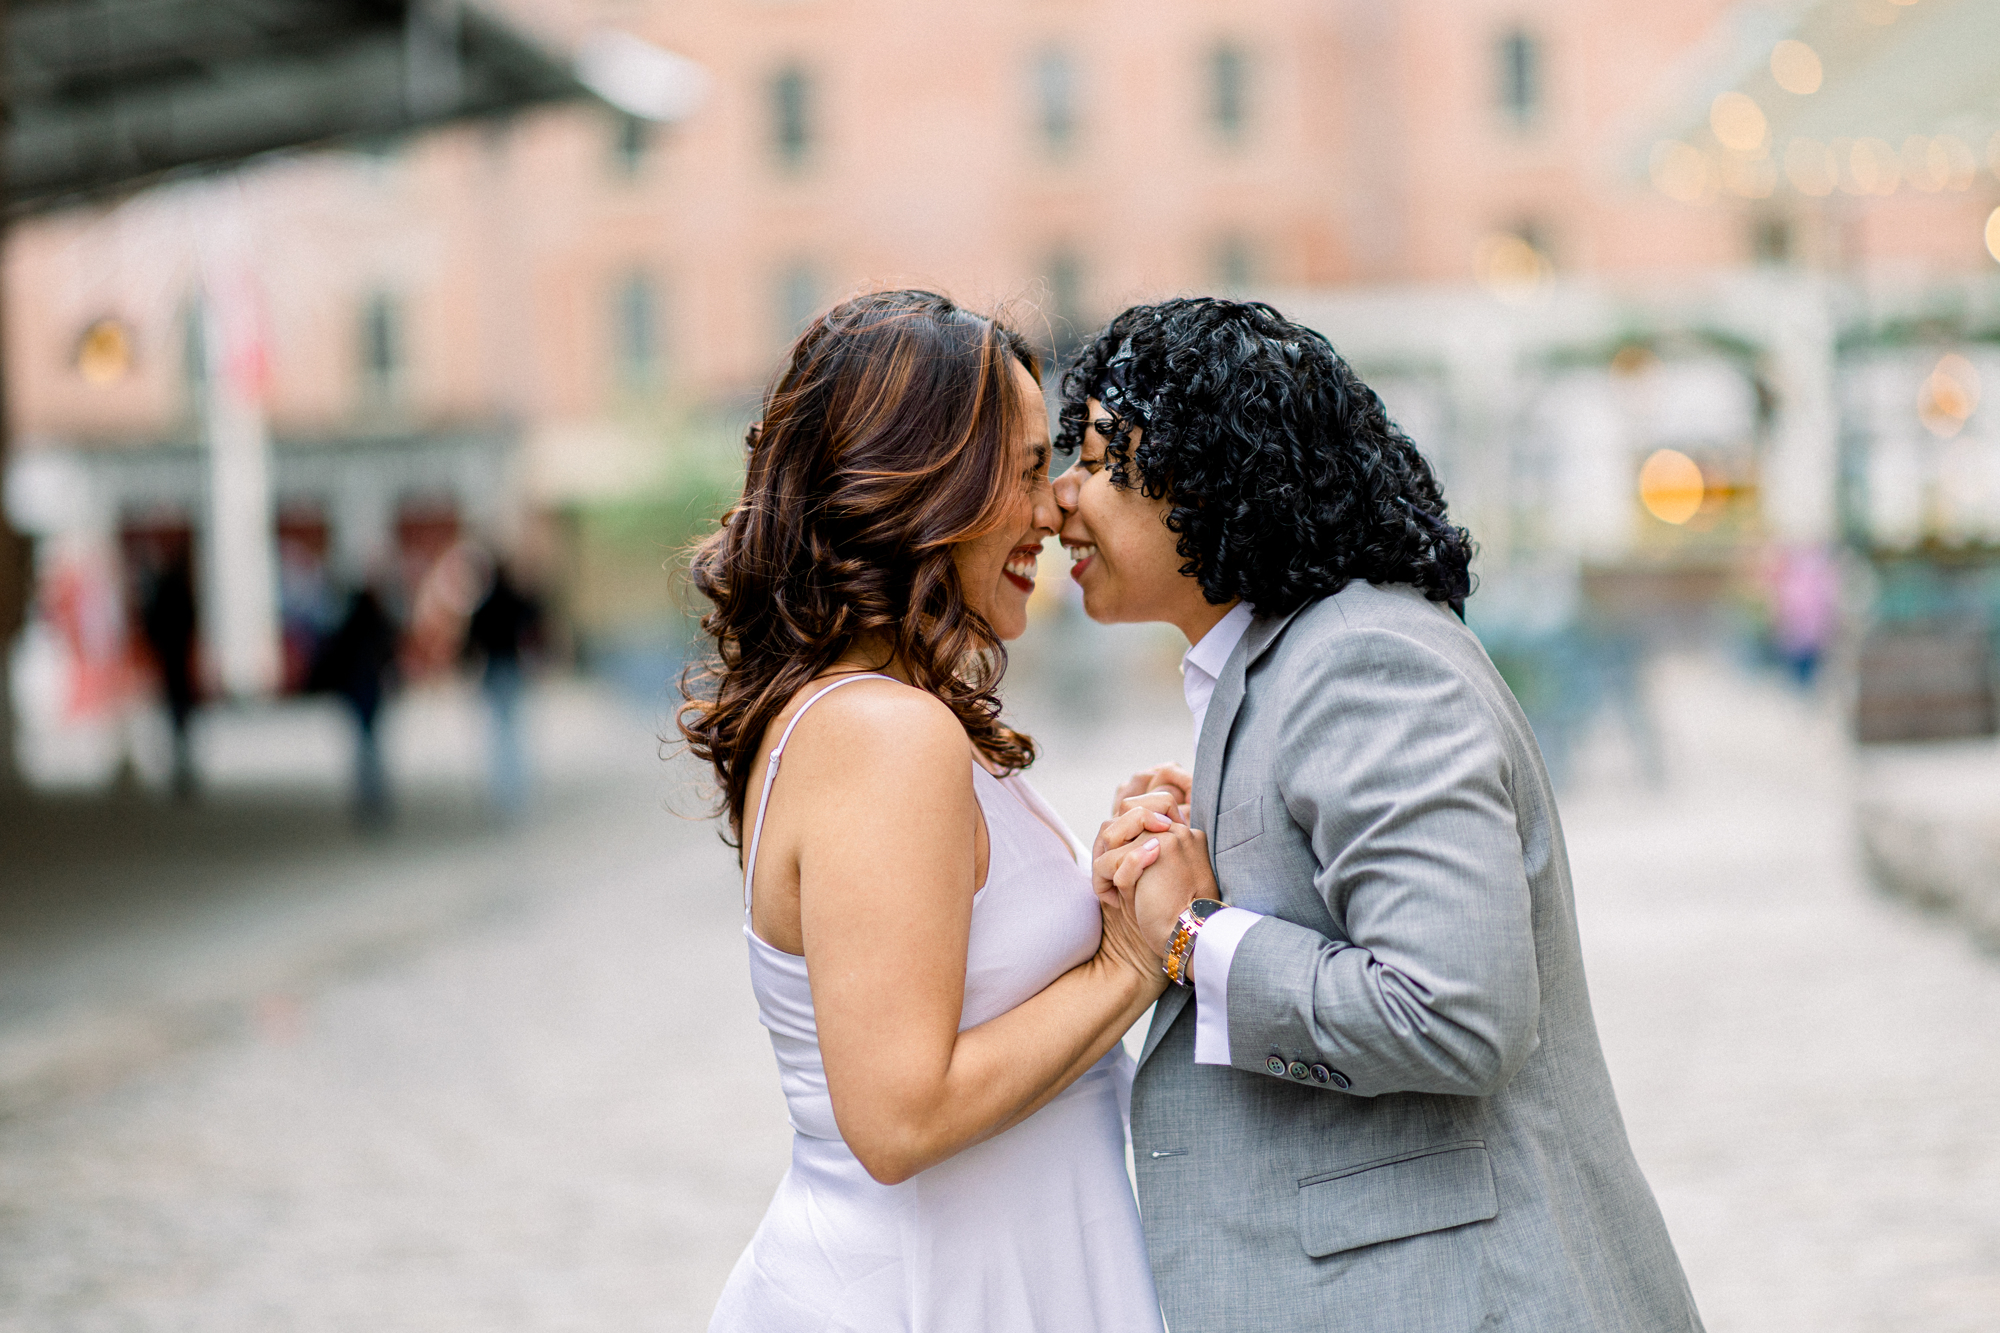 Marvelous South Street Seaport Engagement Photography